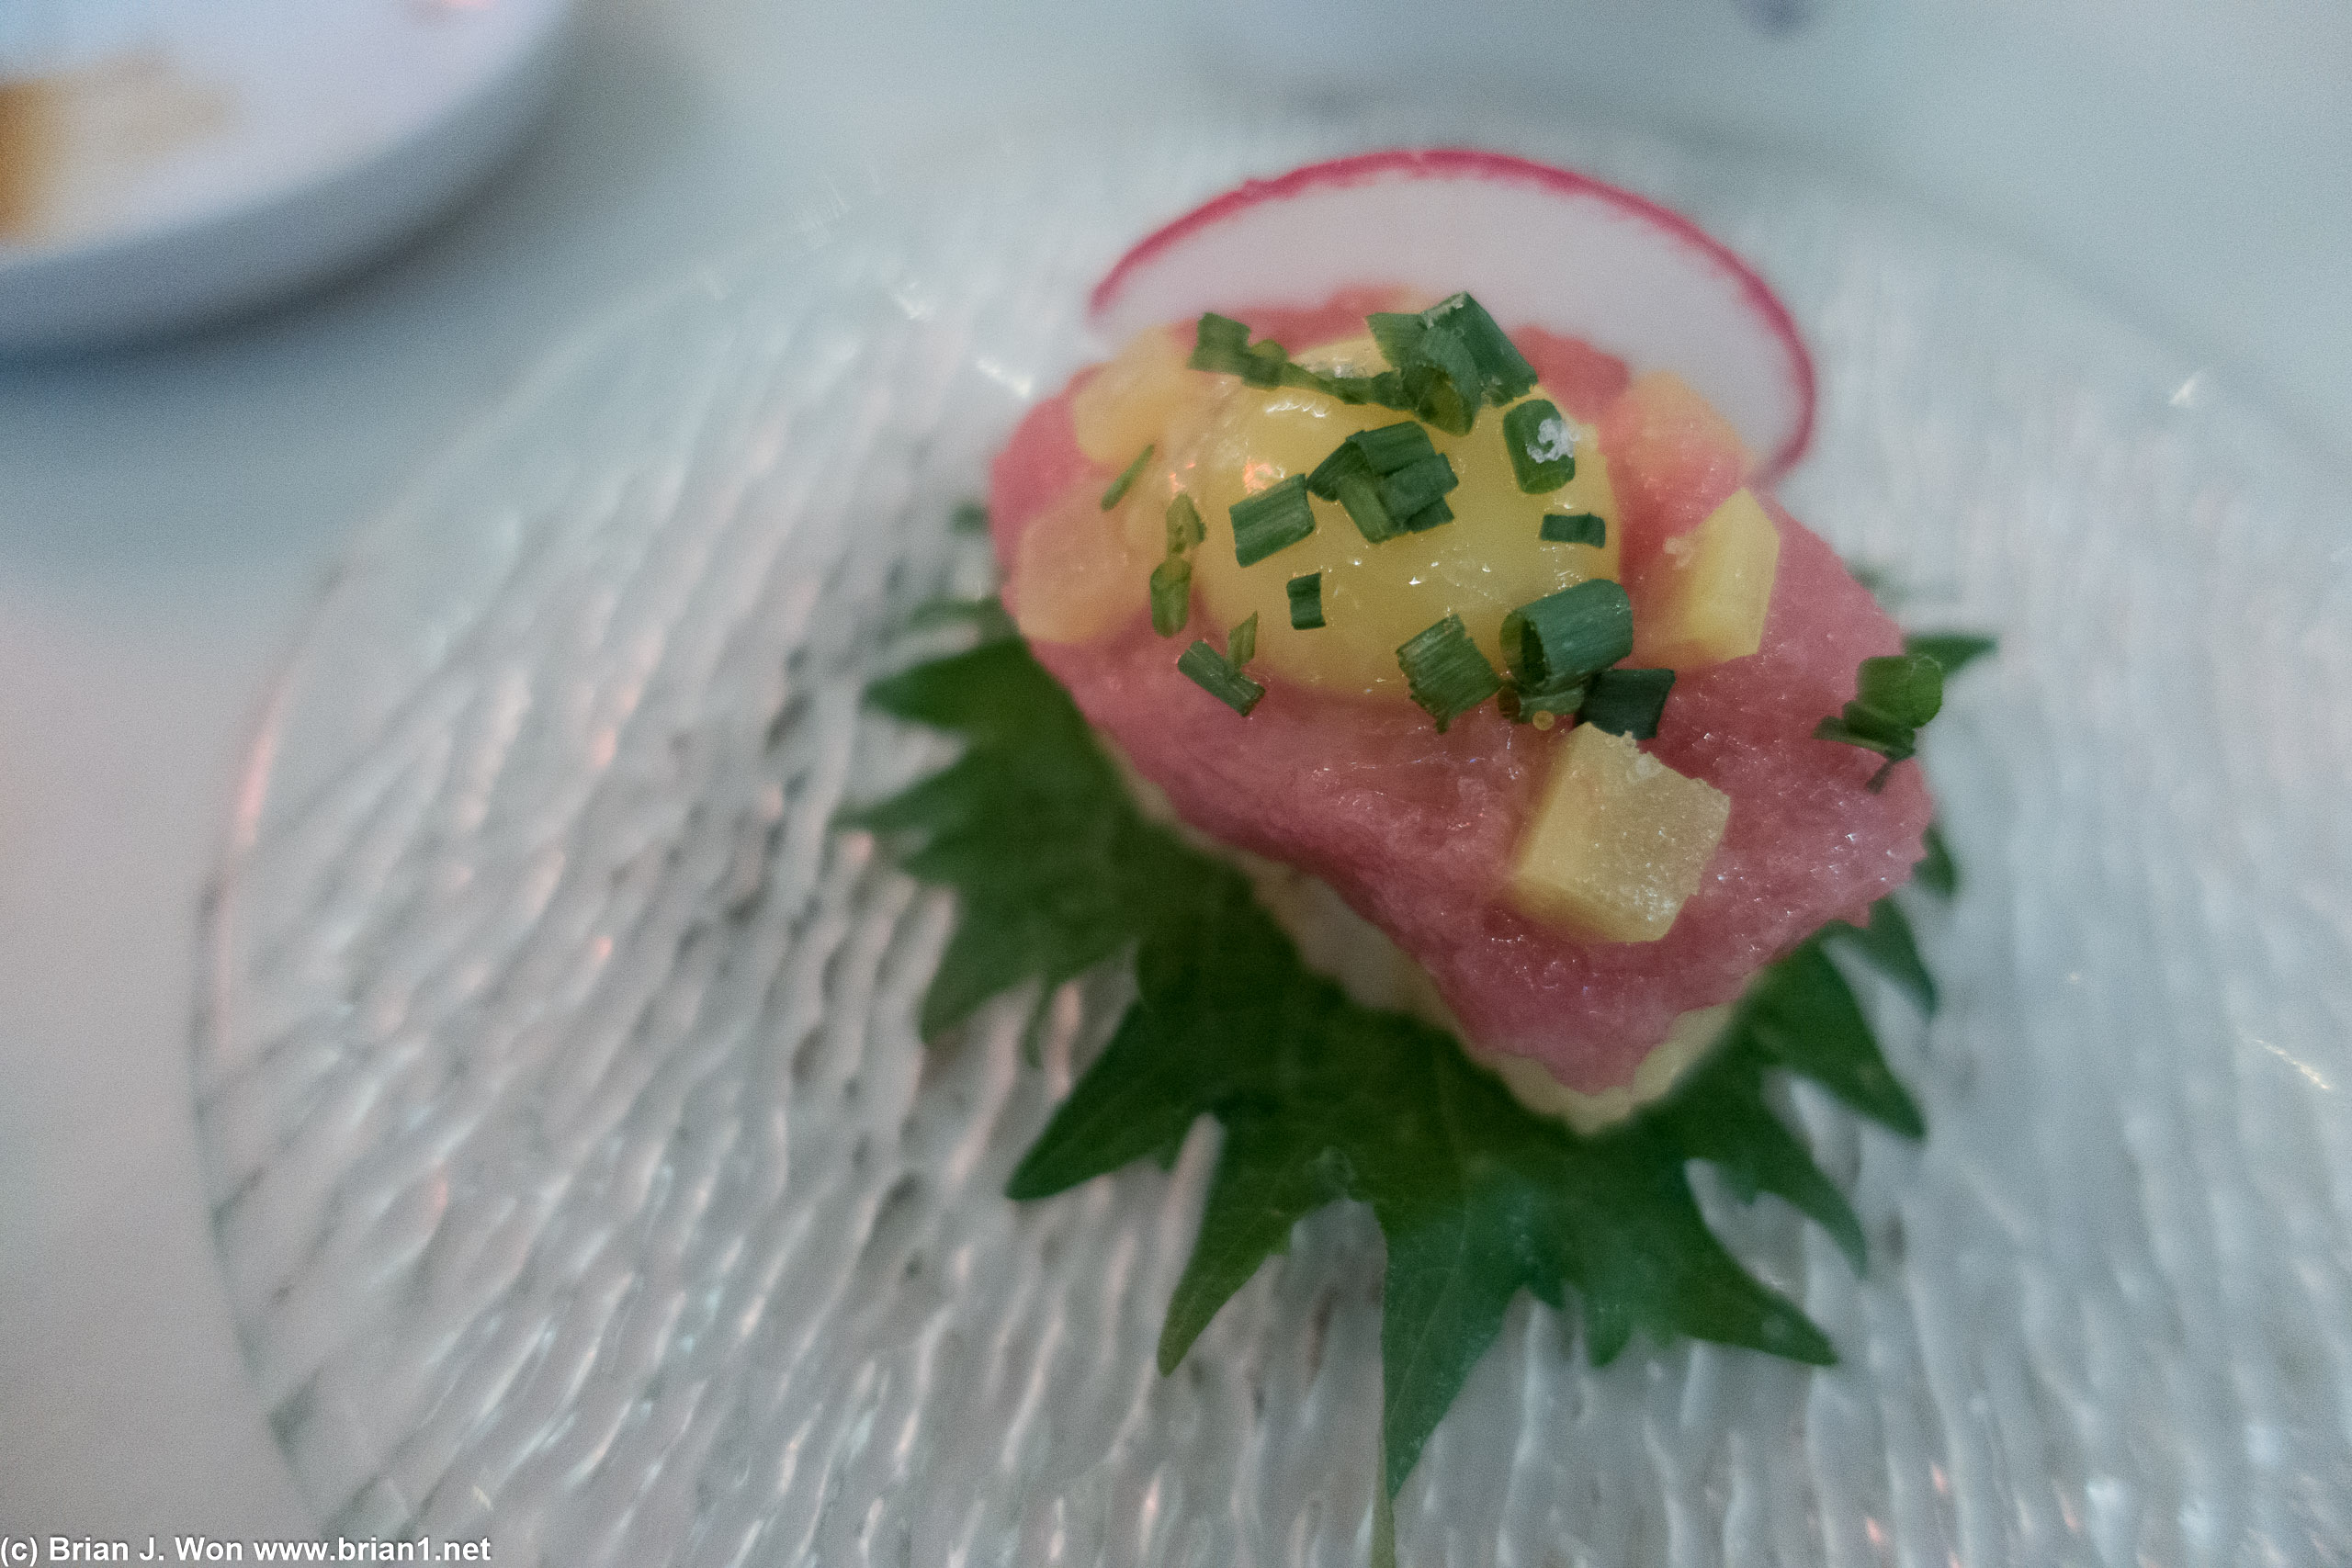 Rice with uni butter (?), chopped toro, quail egg, radish, shiso leaf. Some harmony in the flavors and textures.